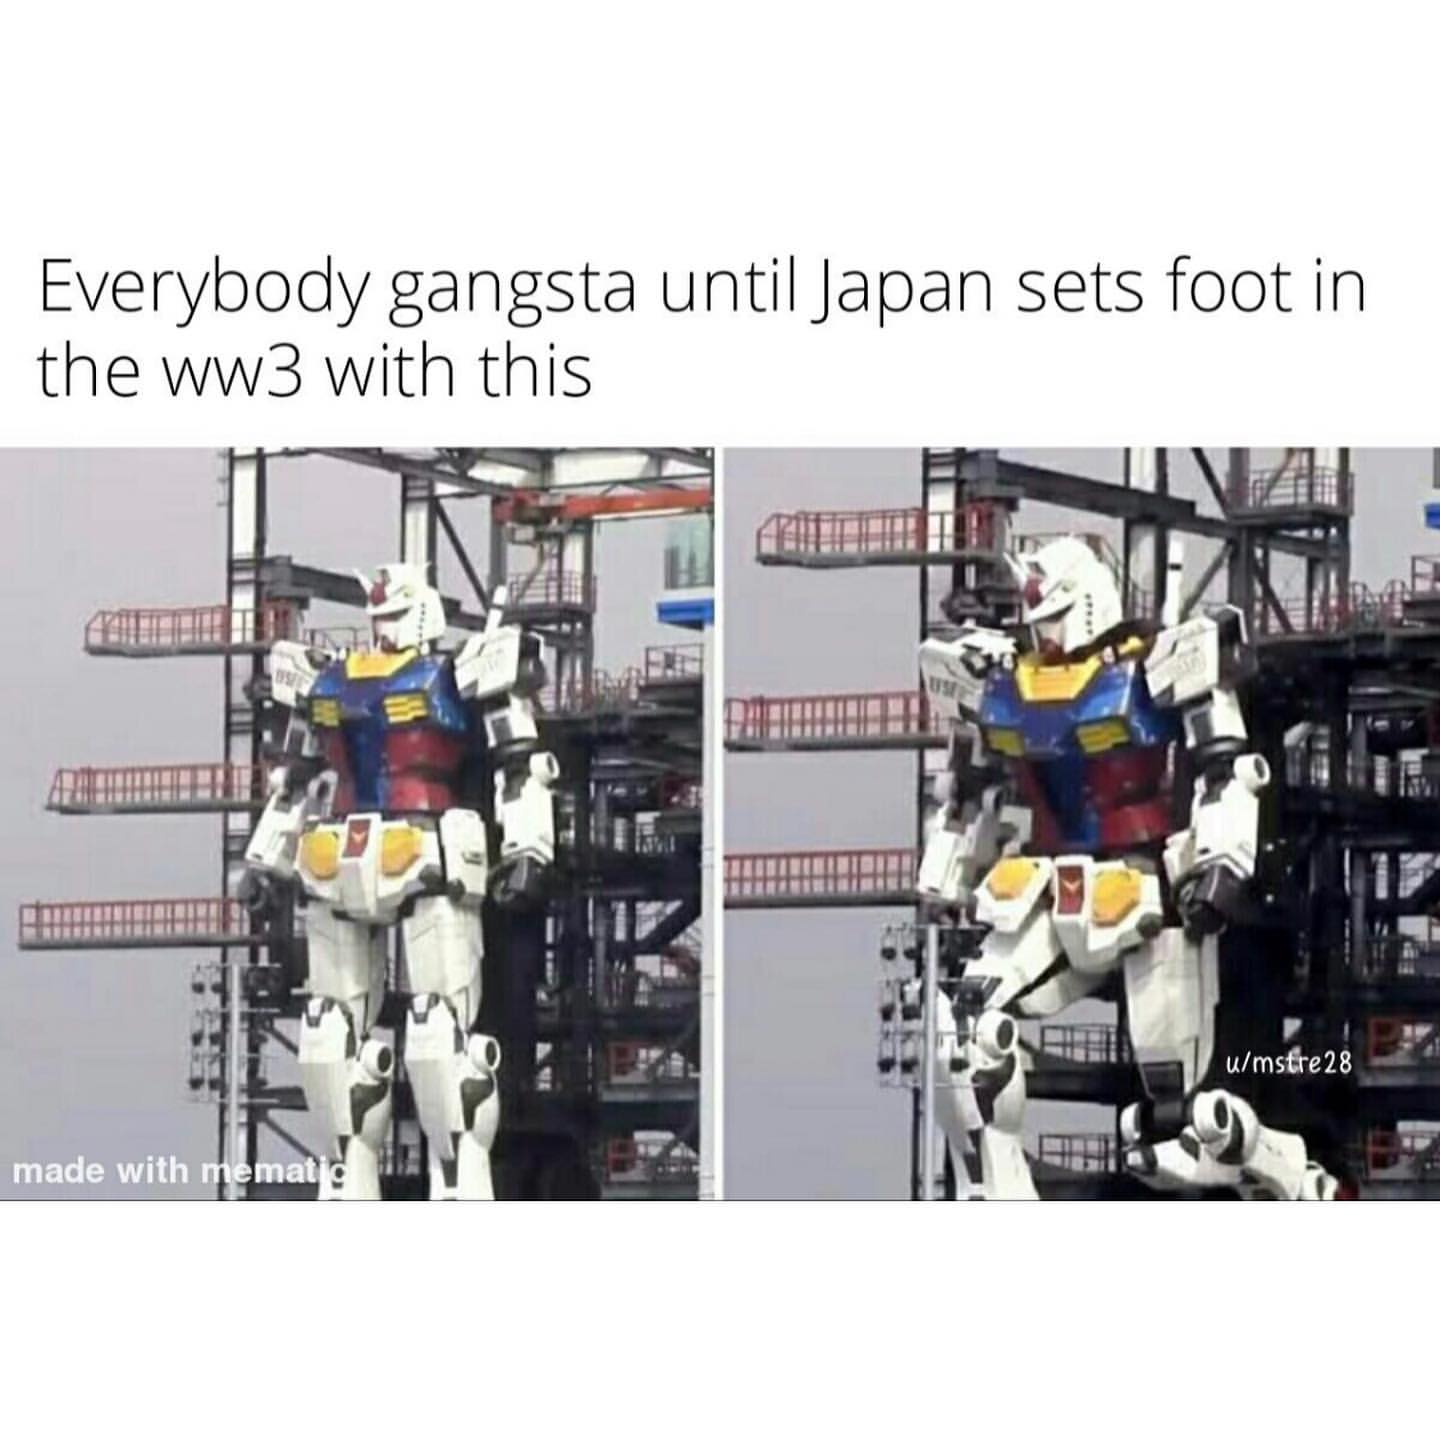 Everybody gangsta until Japan sets foot in the ww3 with this.